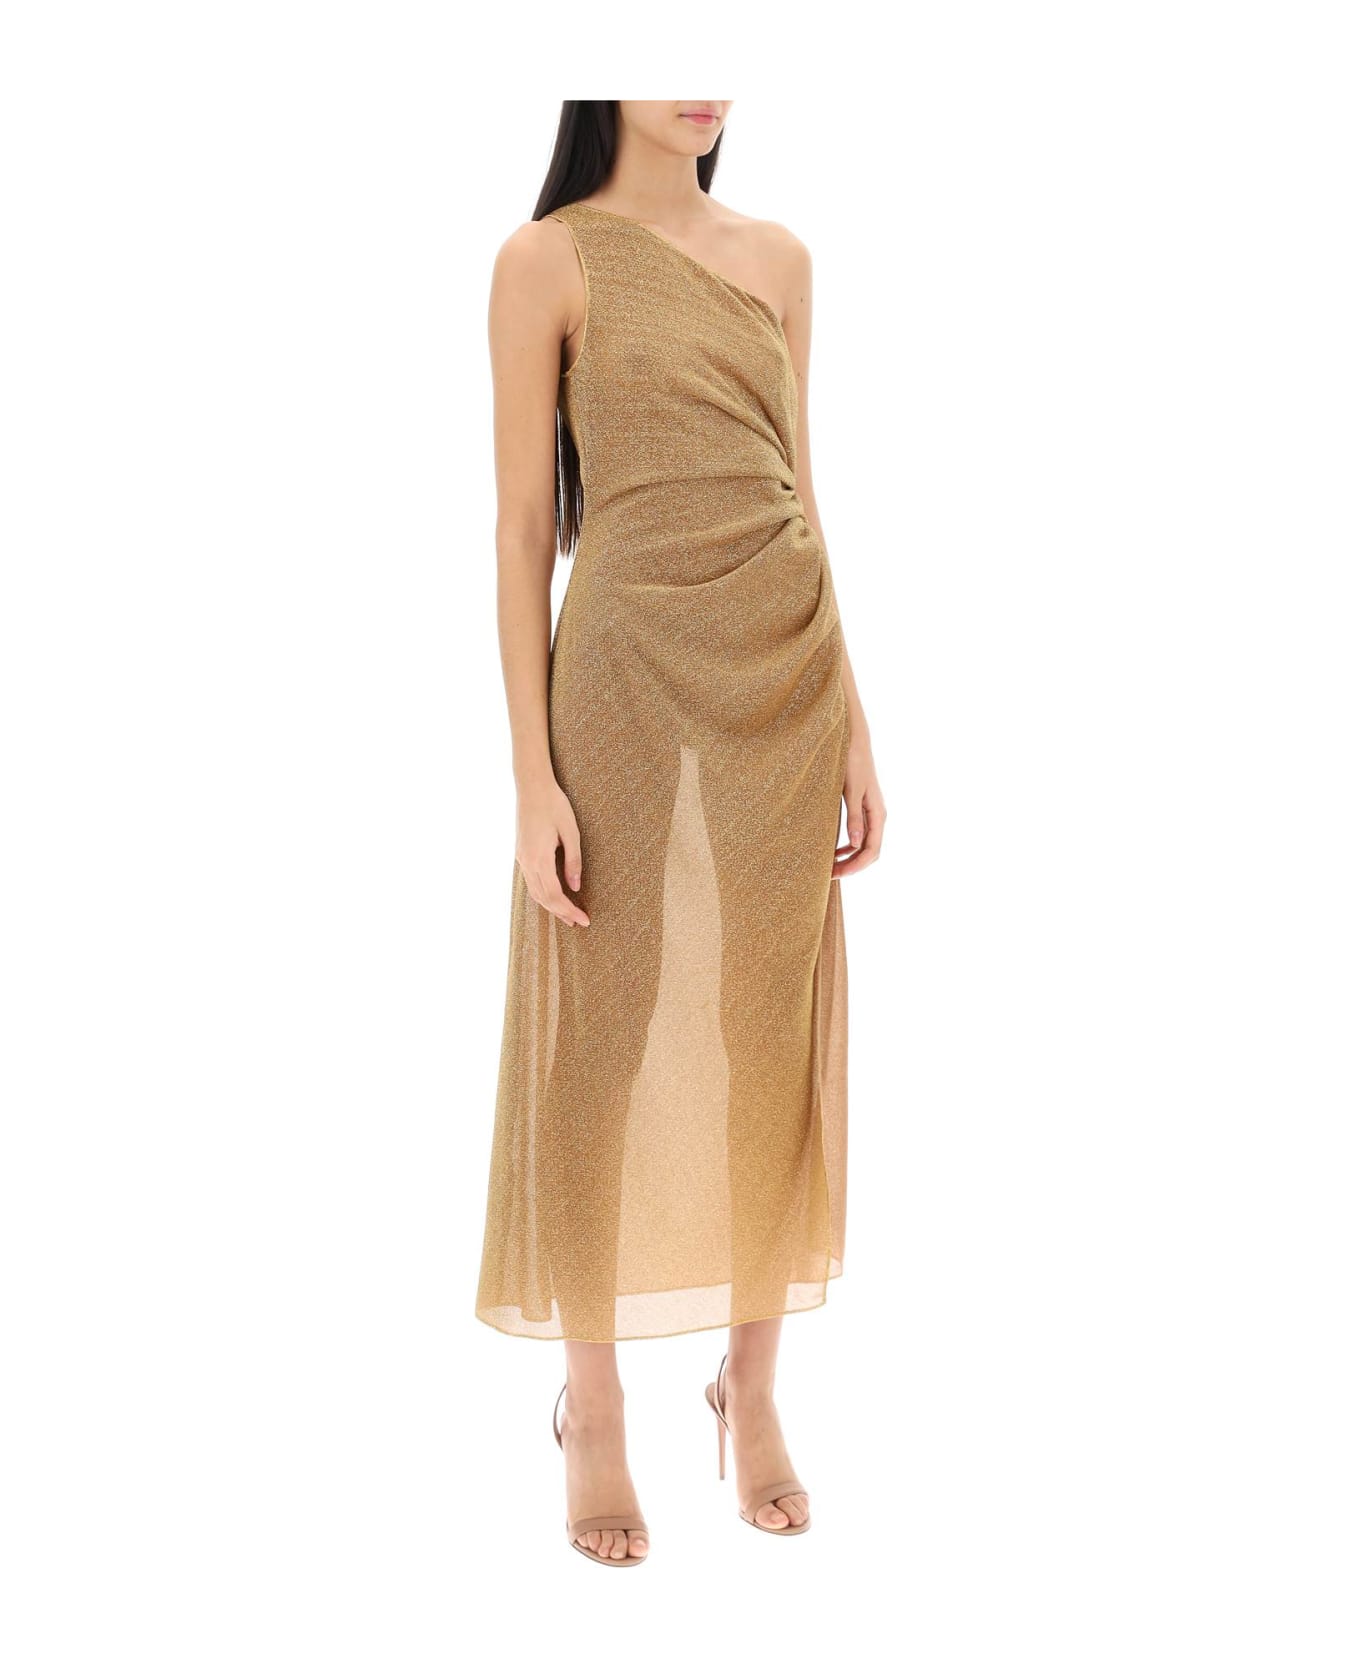 Oseree One-shoulder Dress In Lurex Knit - TOFFEE (Gold)